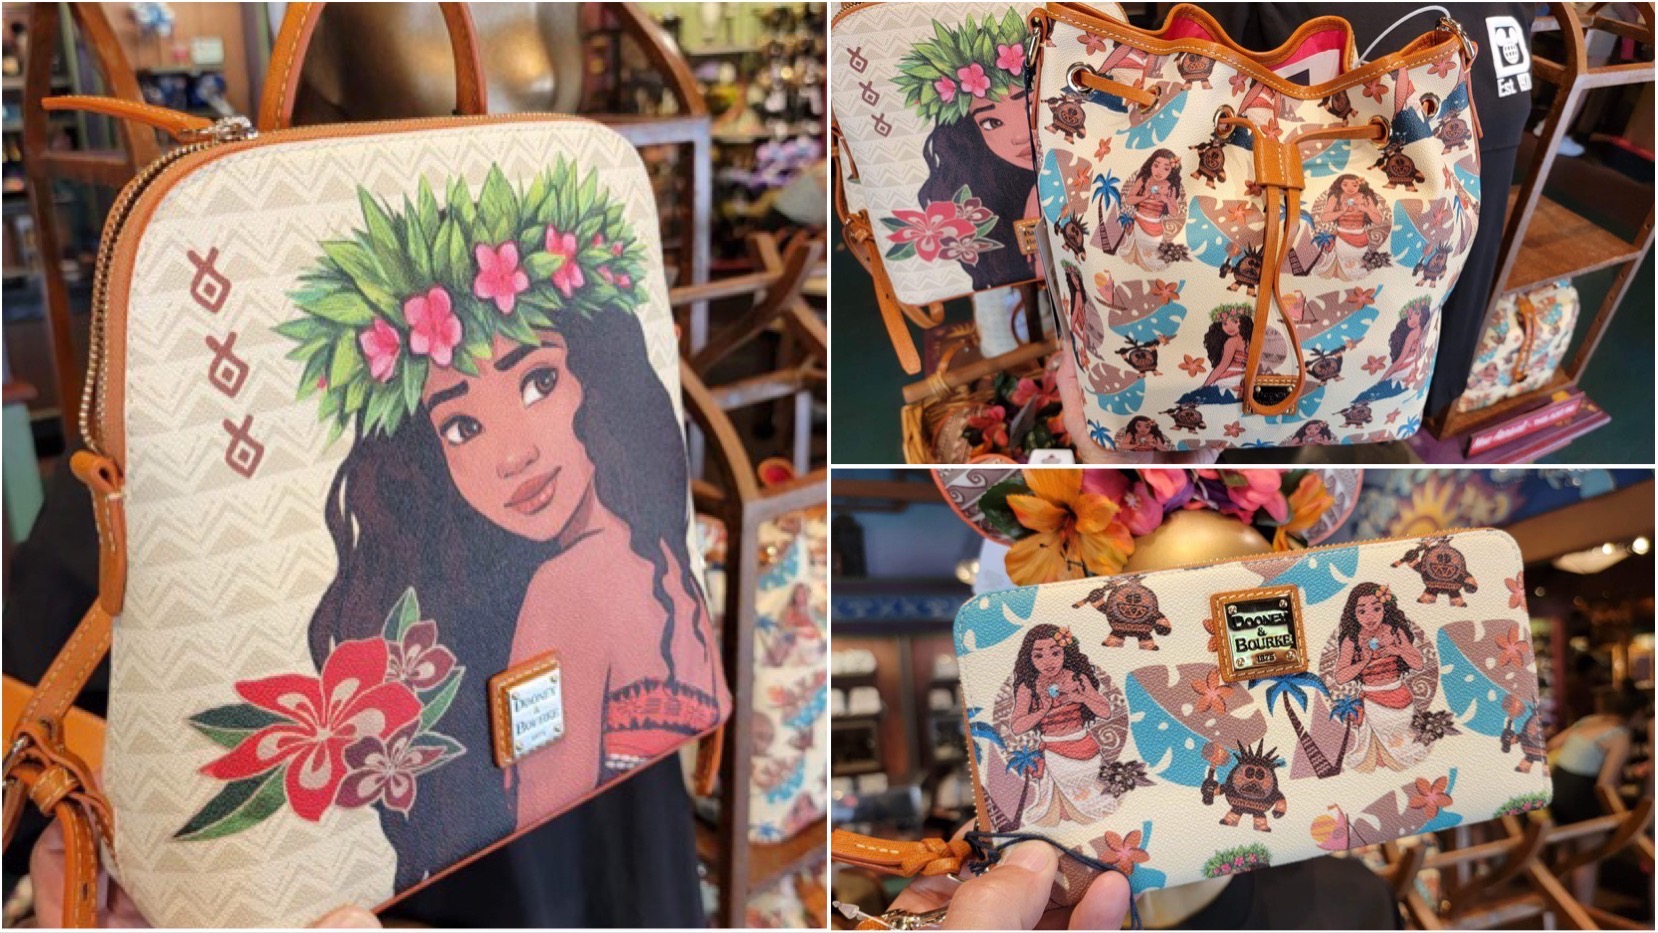 New Moana Dooney & Bourke Collection Available At Animal Kingdom!